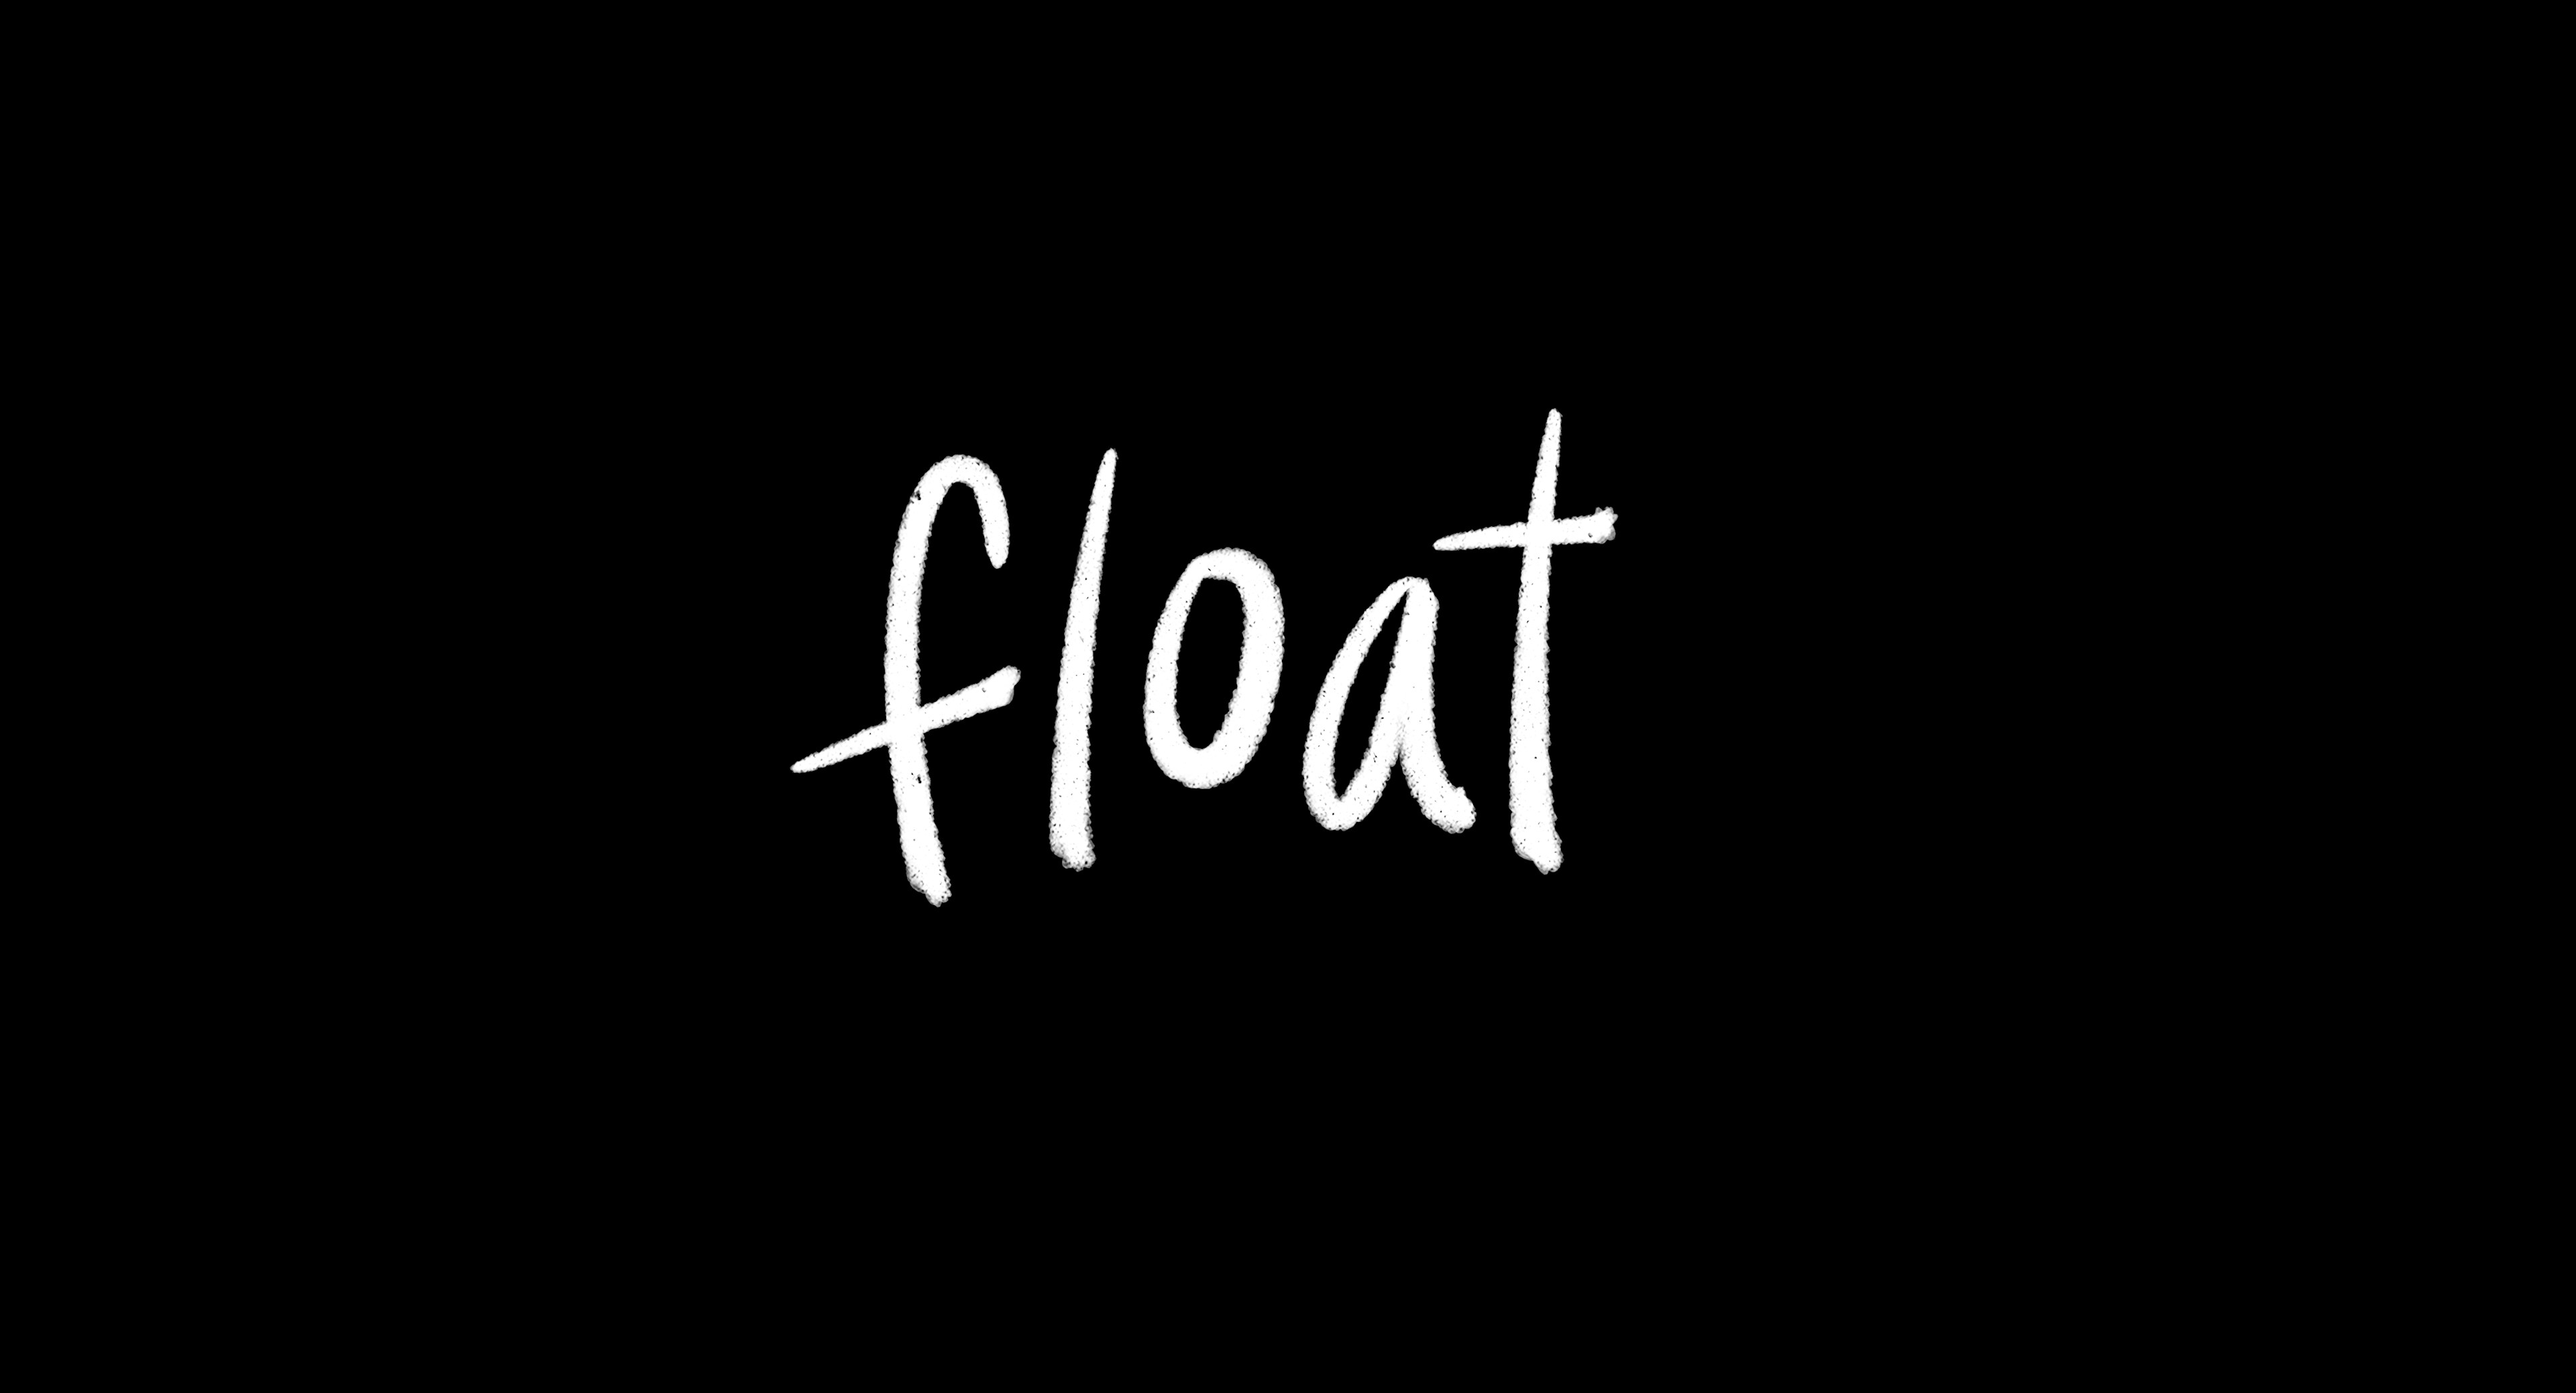 "Float" is written in white against a black background